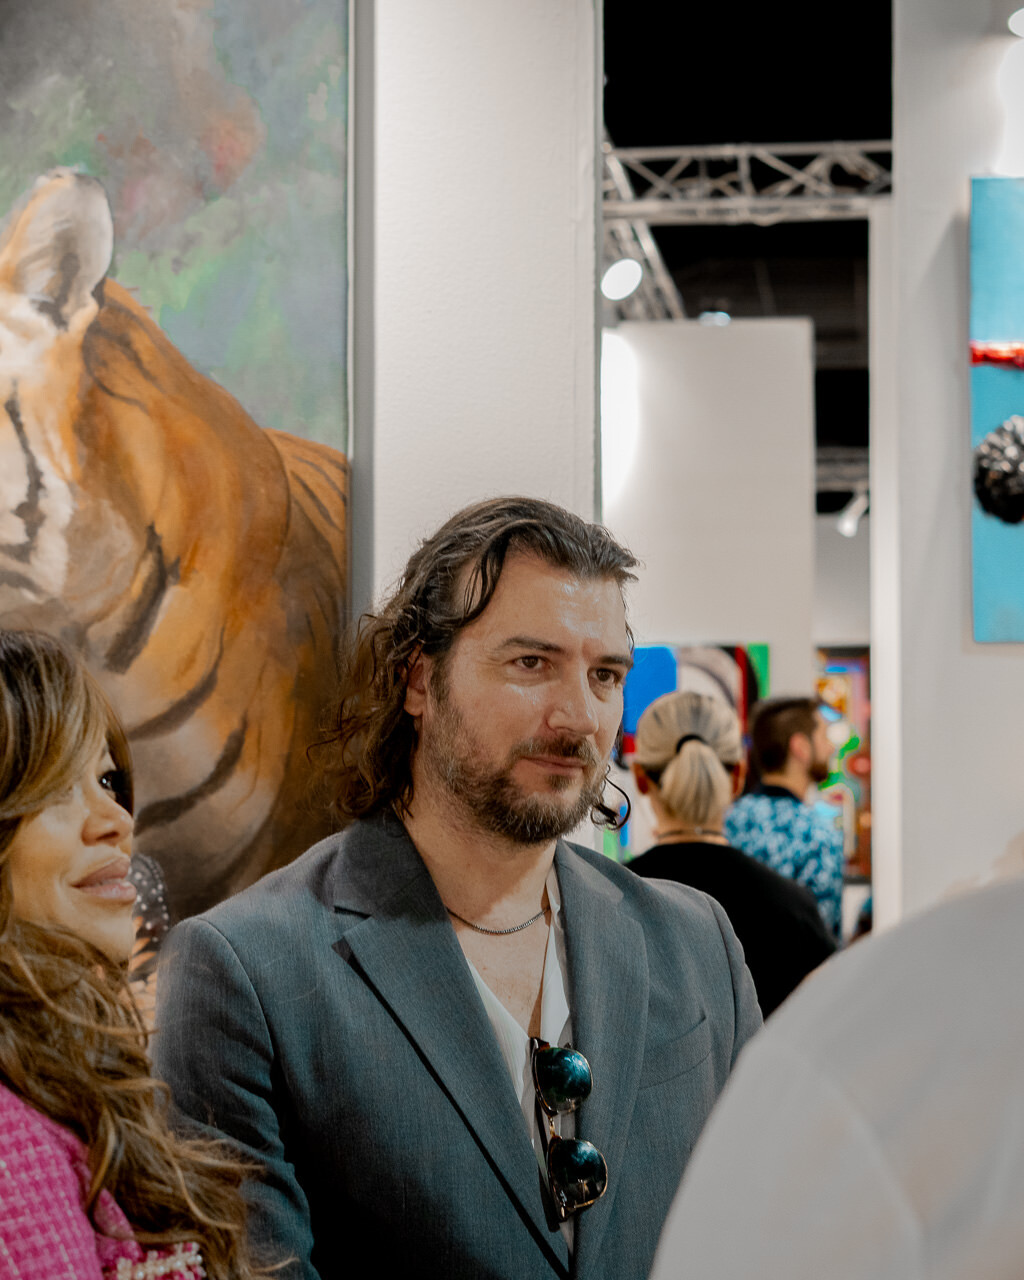 Artist Alex Righetto stands engaged with a group of attendees at Miami Art Week, with his painting 'The Guardian' adding a layer of artistic depth in the background.